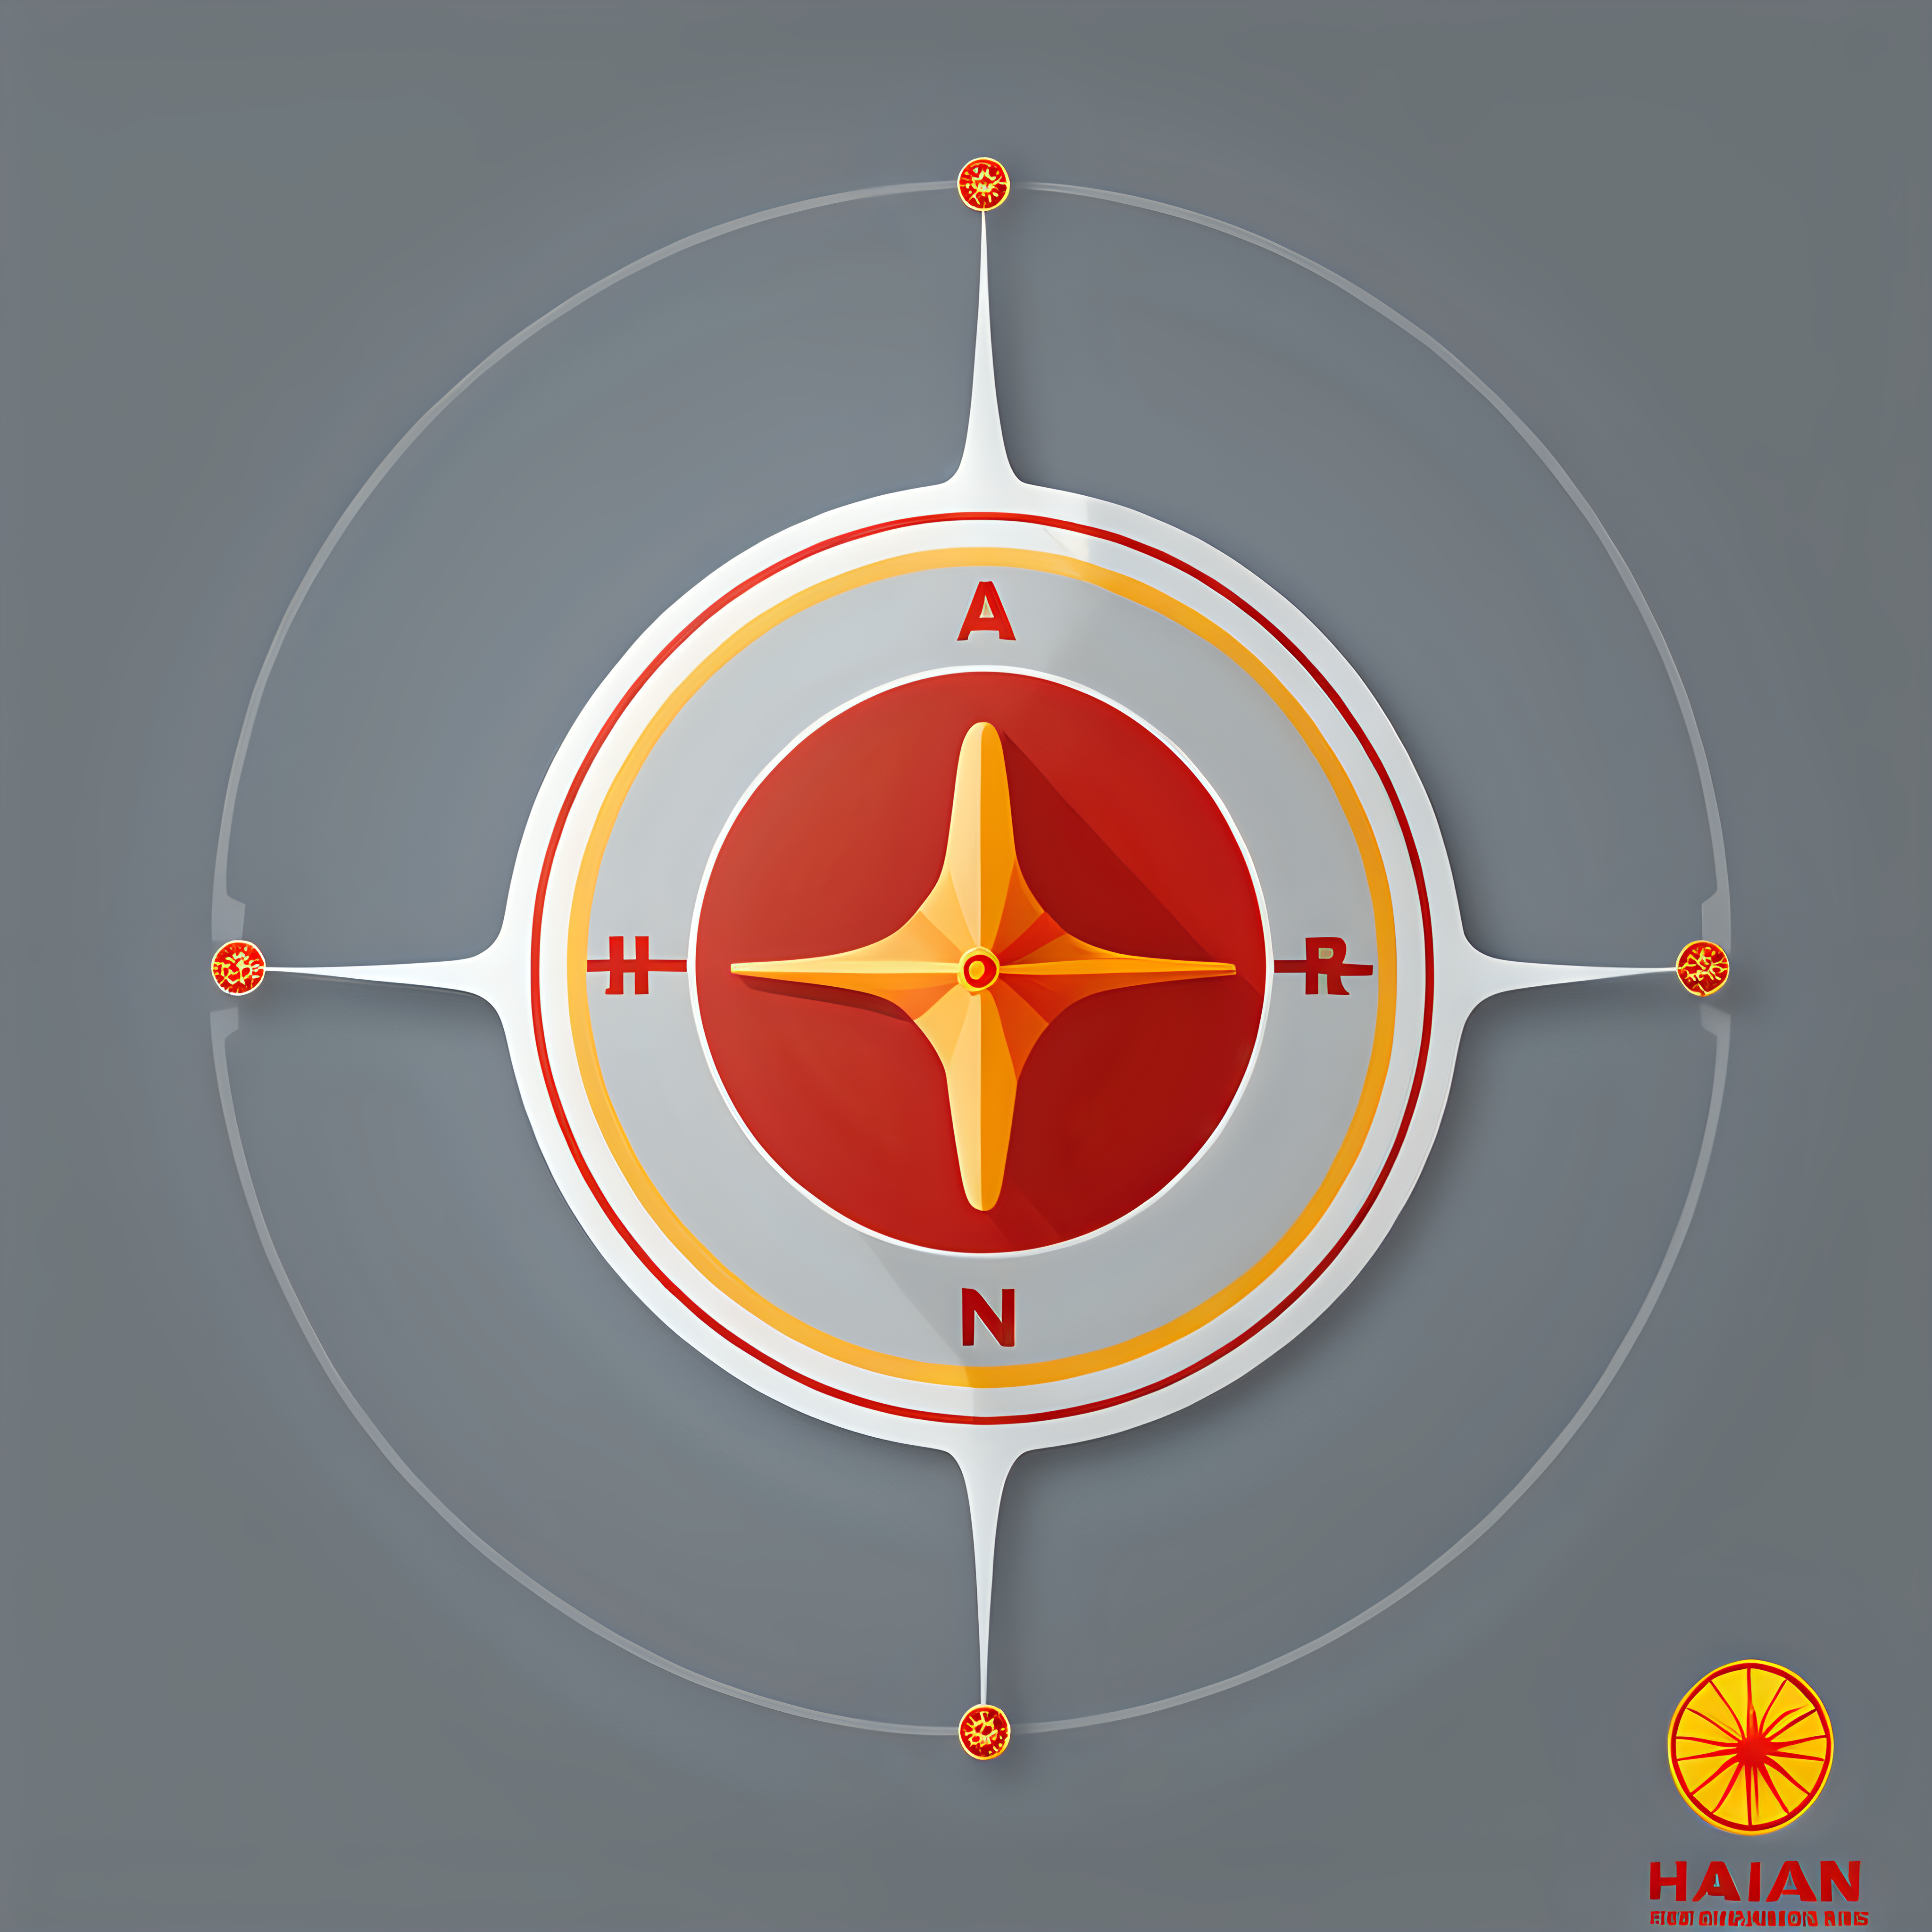 Design for Hainan Airlines radar Use Hainan Airlines